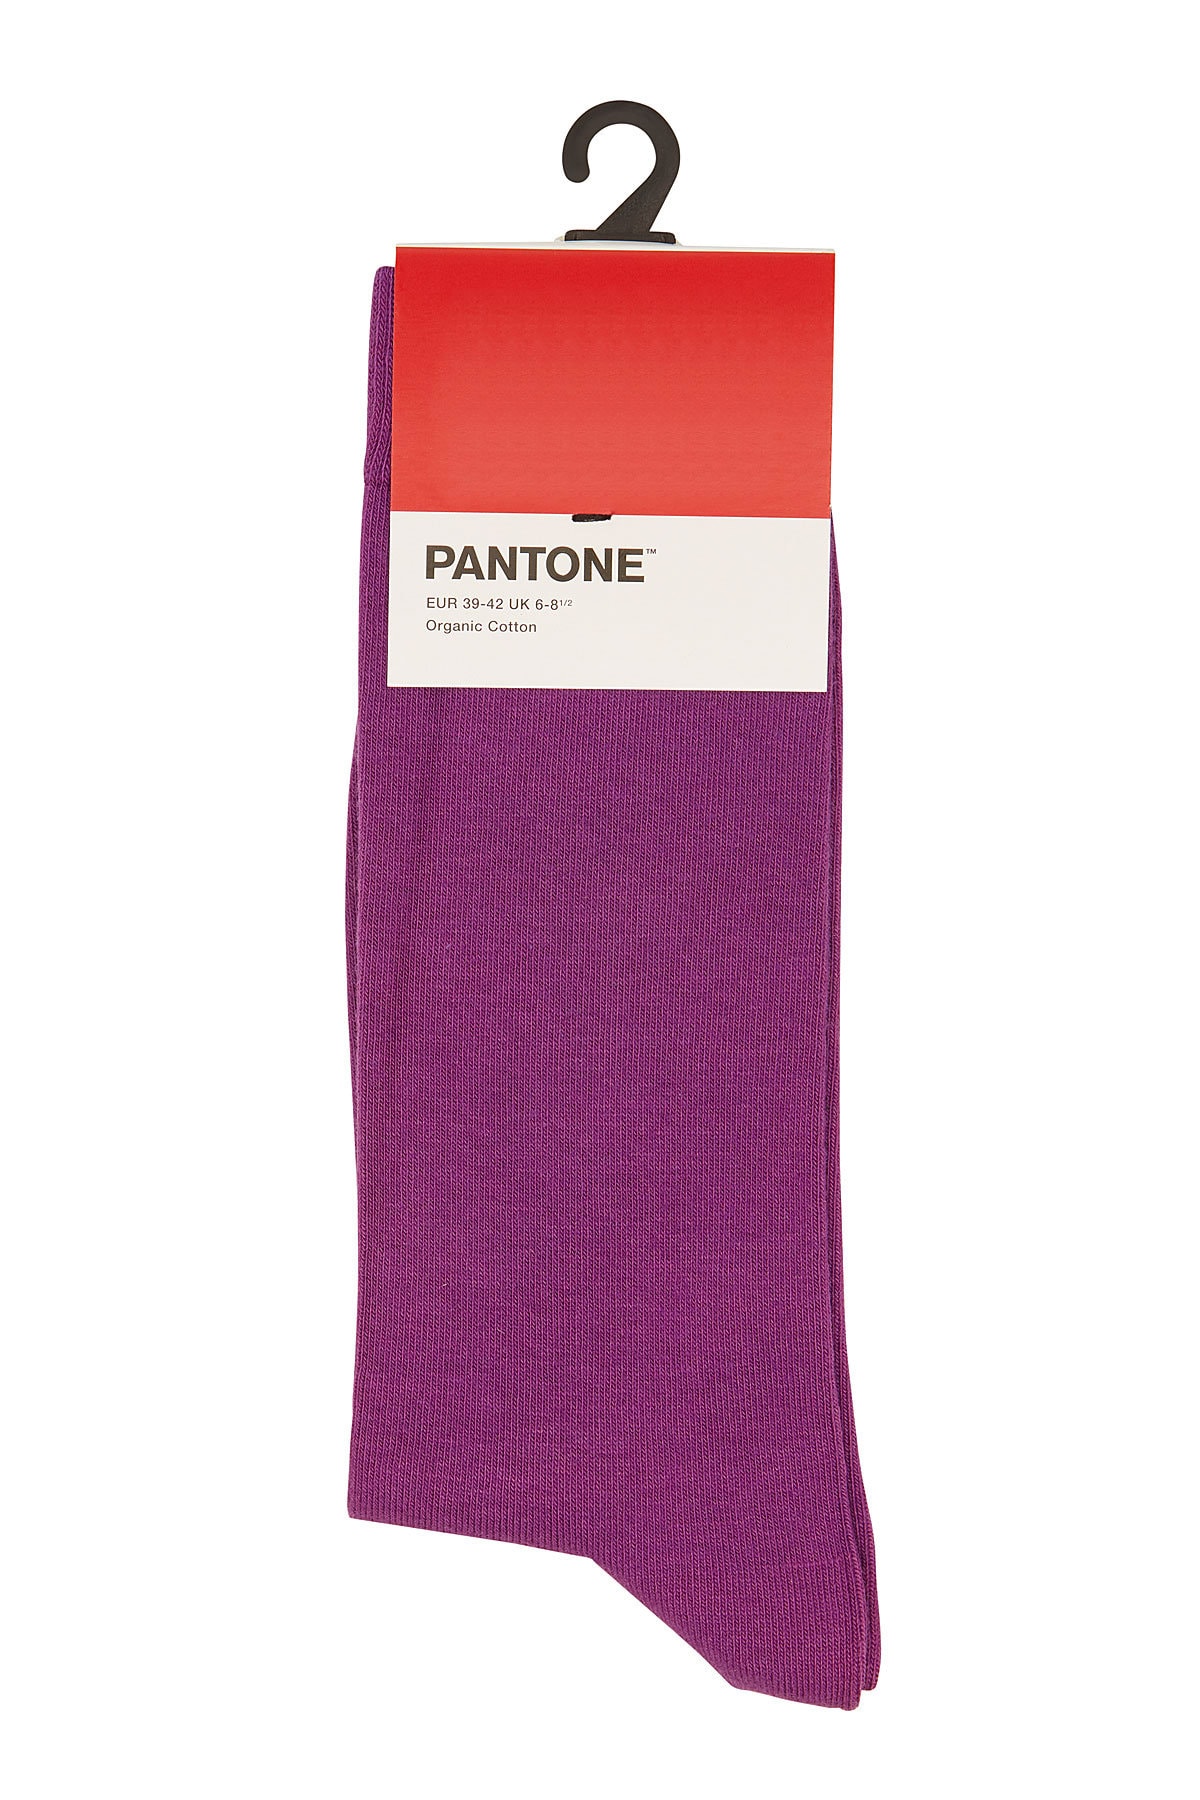 Pantone Socks Are Perfect to Pair with Sneakers | Hypebae